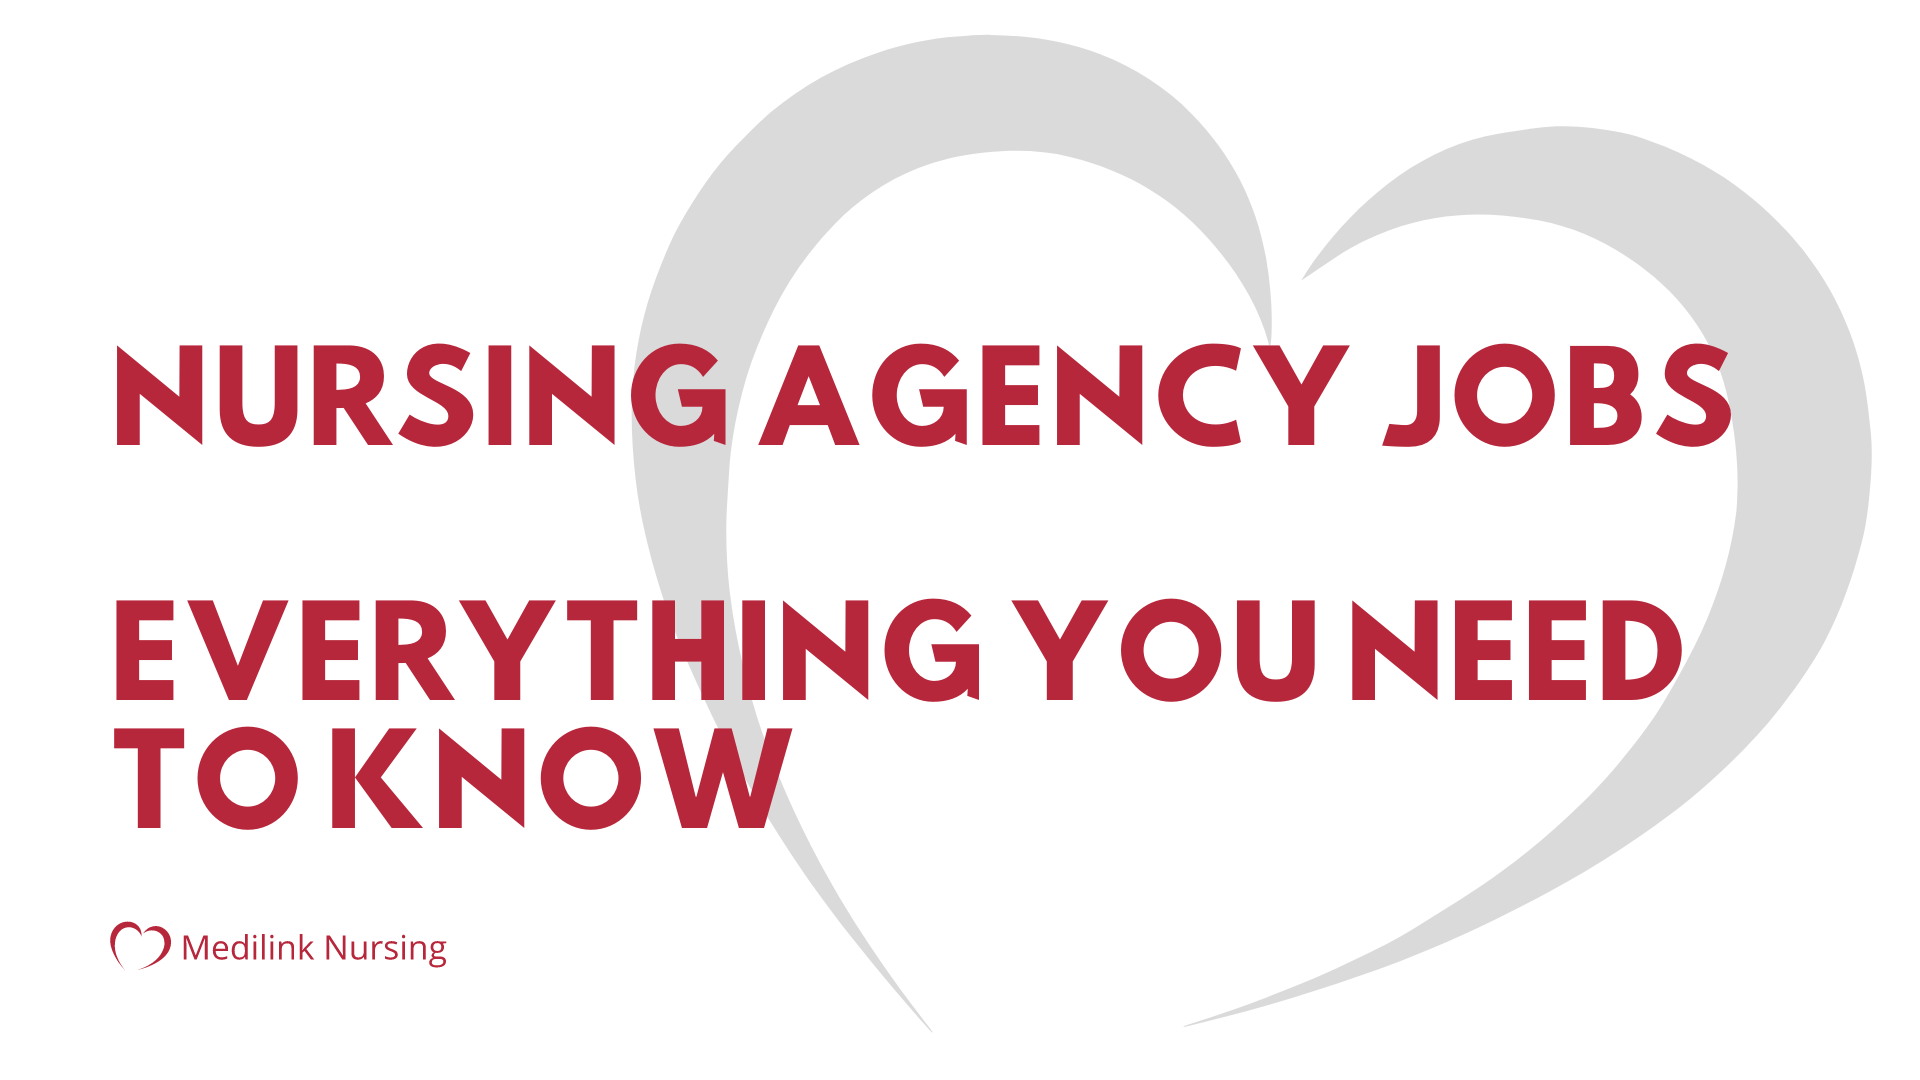 Nursing Agency Jobs – Everything You Need To Know